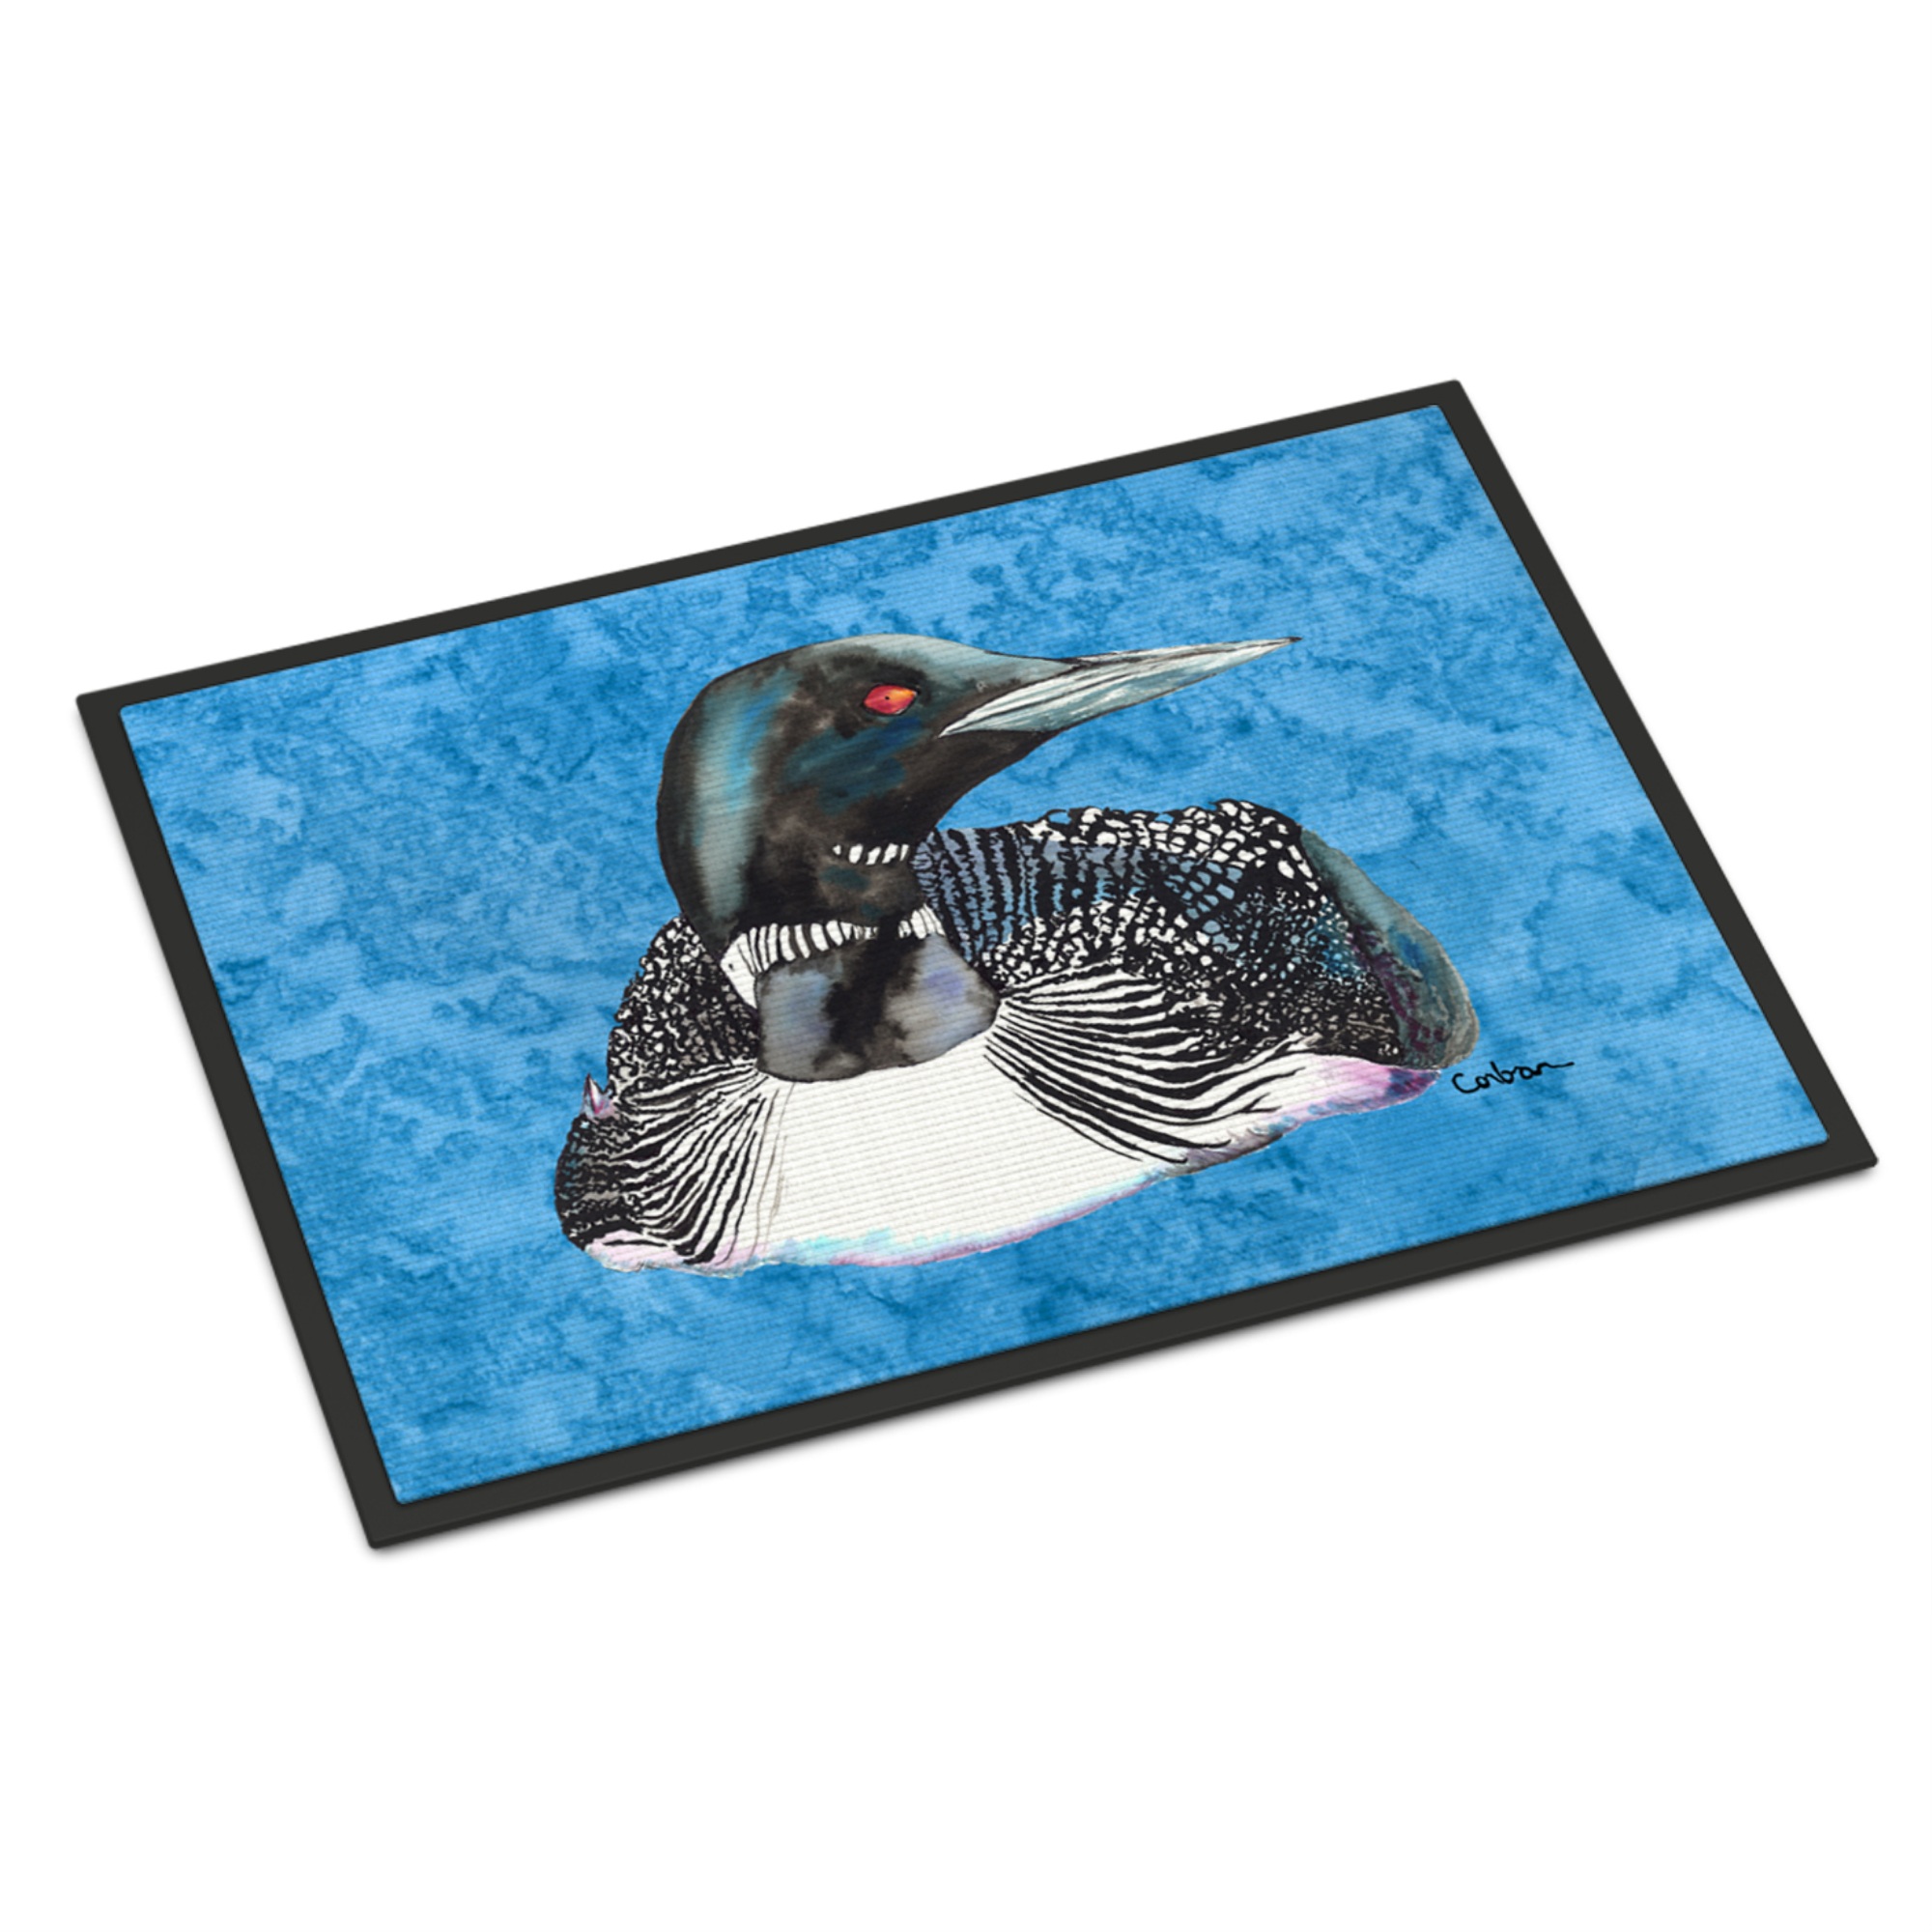 Caroline's Treasures "Caroline's Treasures Loon Indoor or Outdoor Mat, 24"" x 36"", Multicolor"